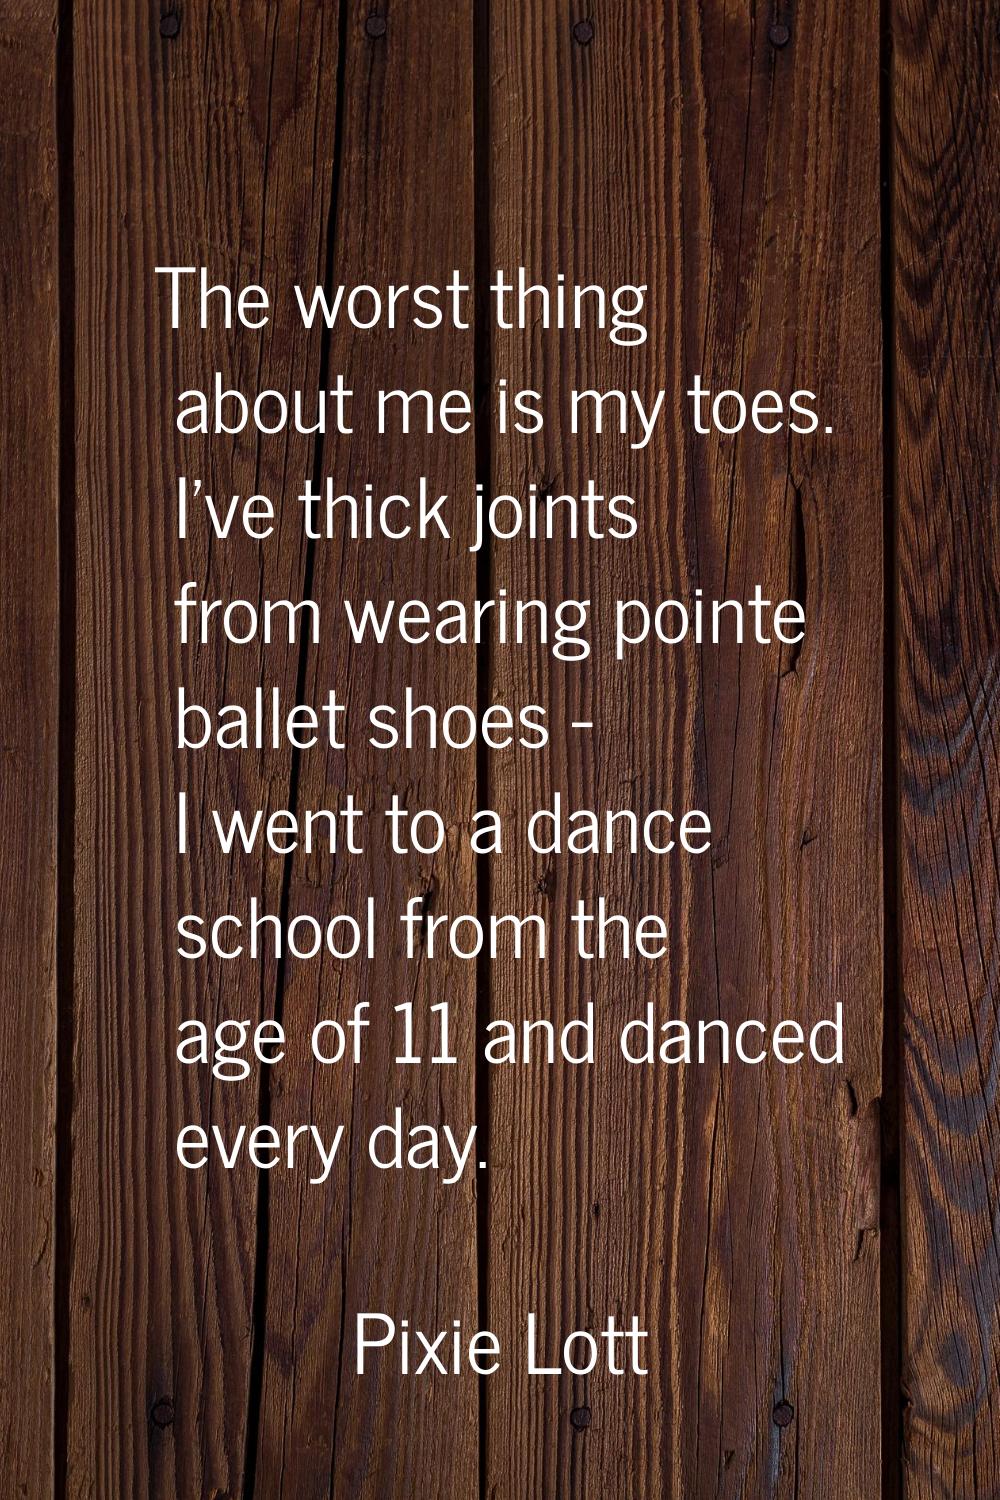 The worst thing about me is my toes. I've thick joints from wearing pointe ballet shoes - I went to